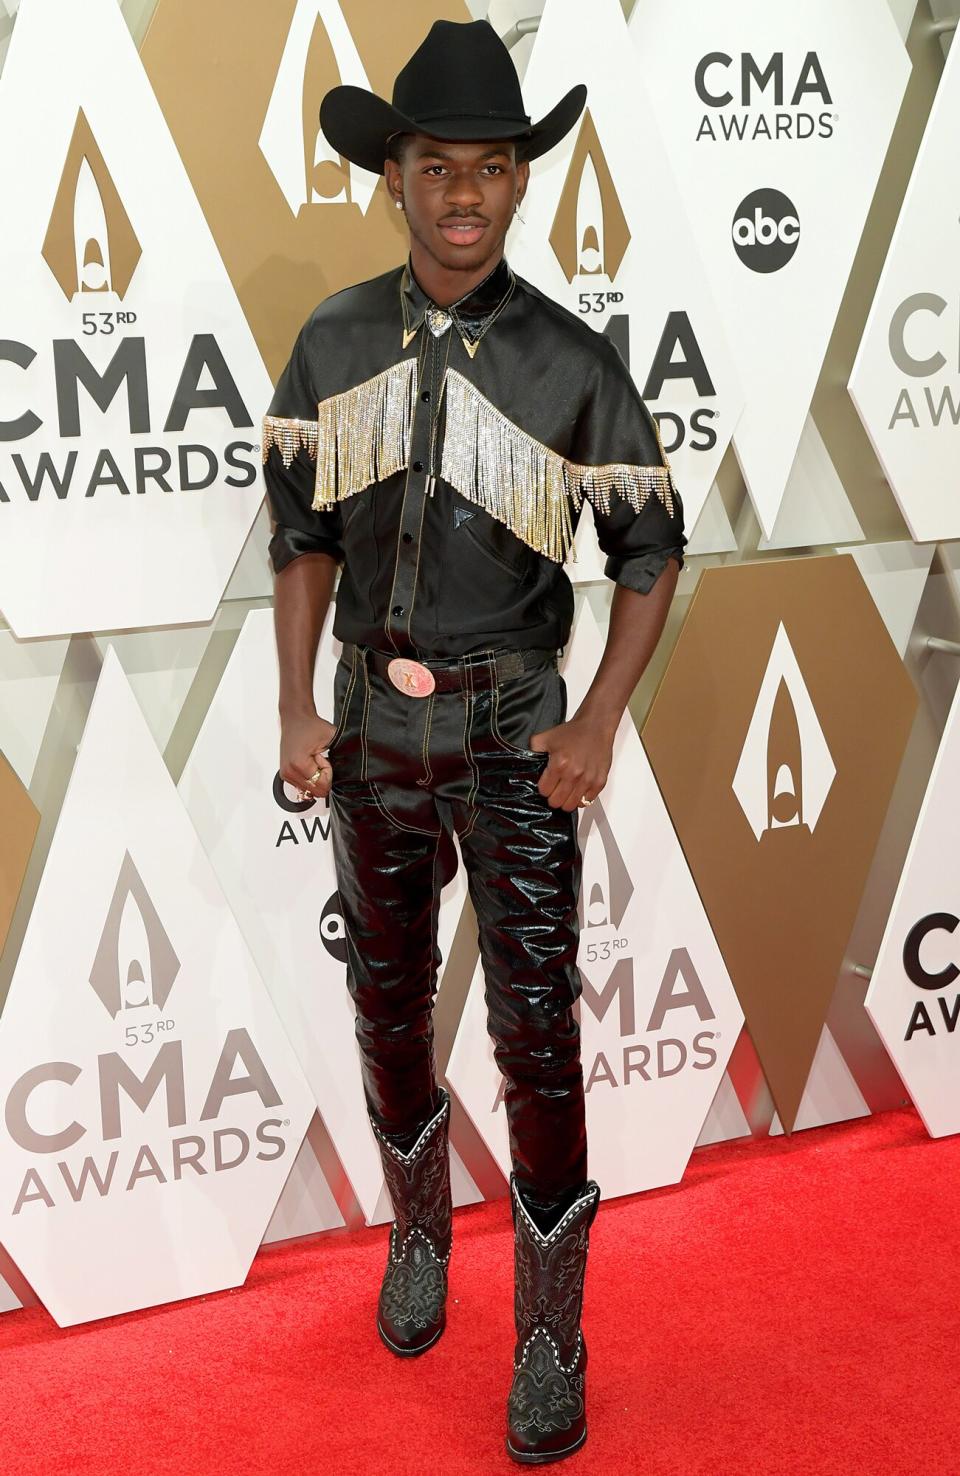 Lil Nas X attends the 53rd annual CMA Awards at the Music City Center on November 13, 2019 in Nashville, Tennessee